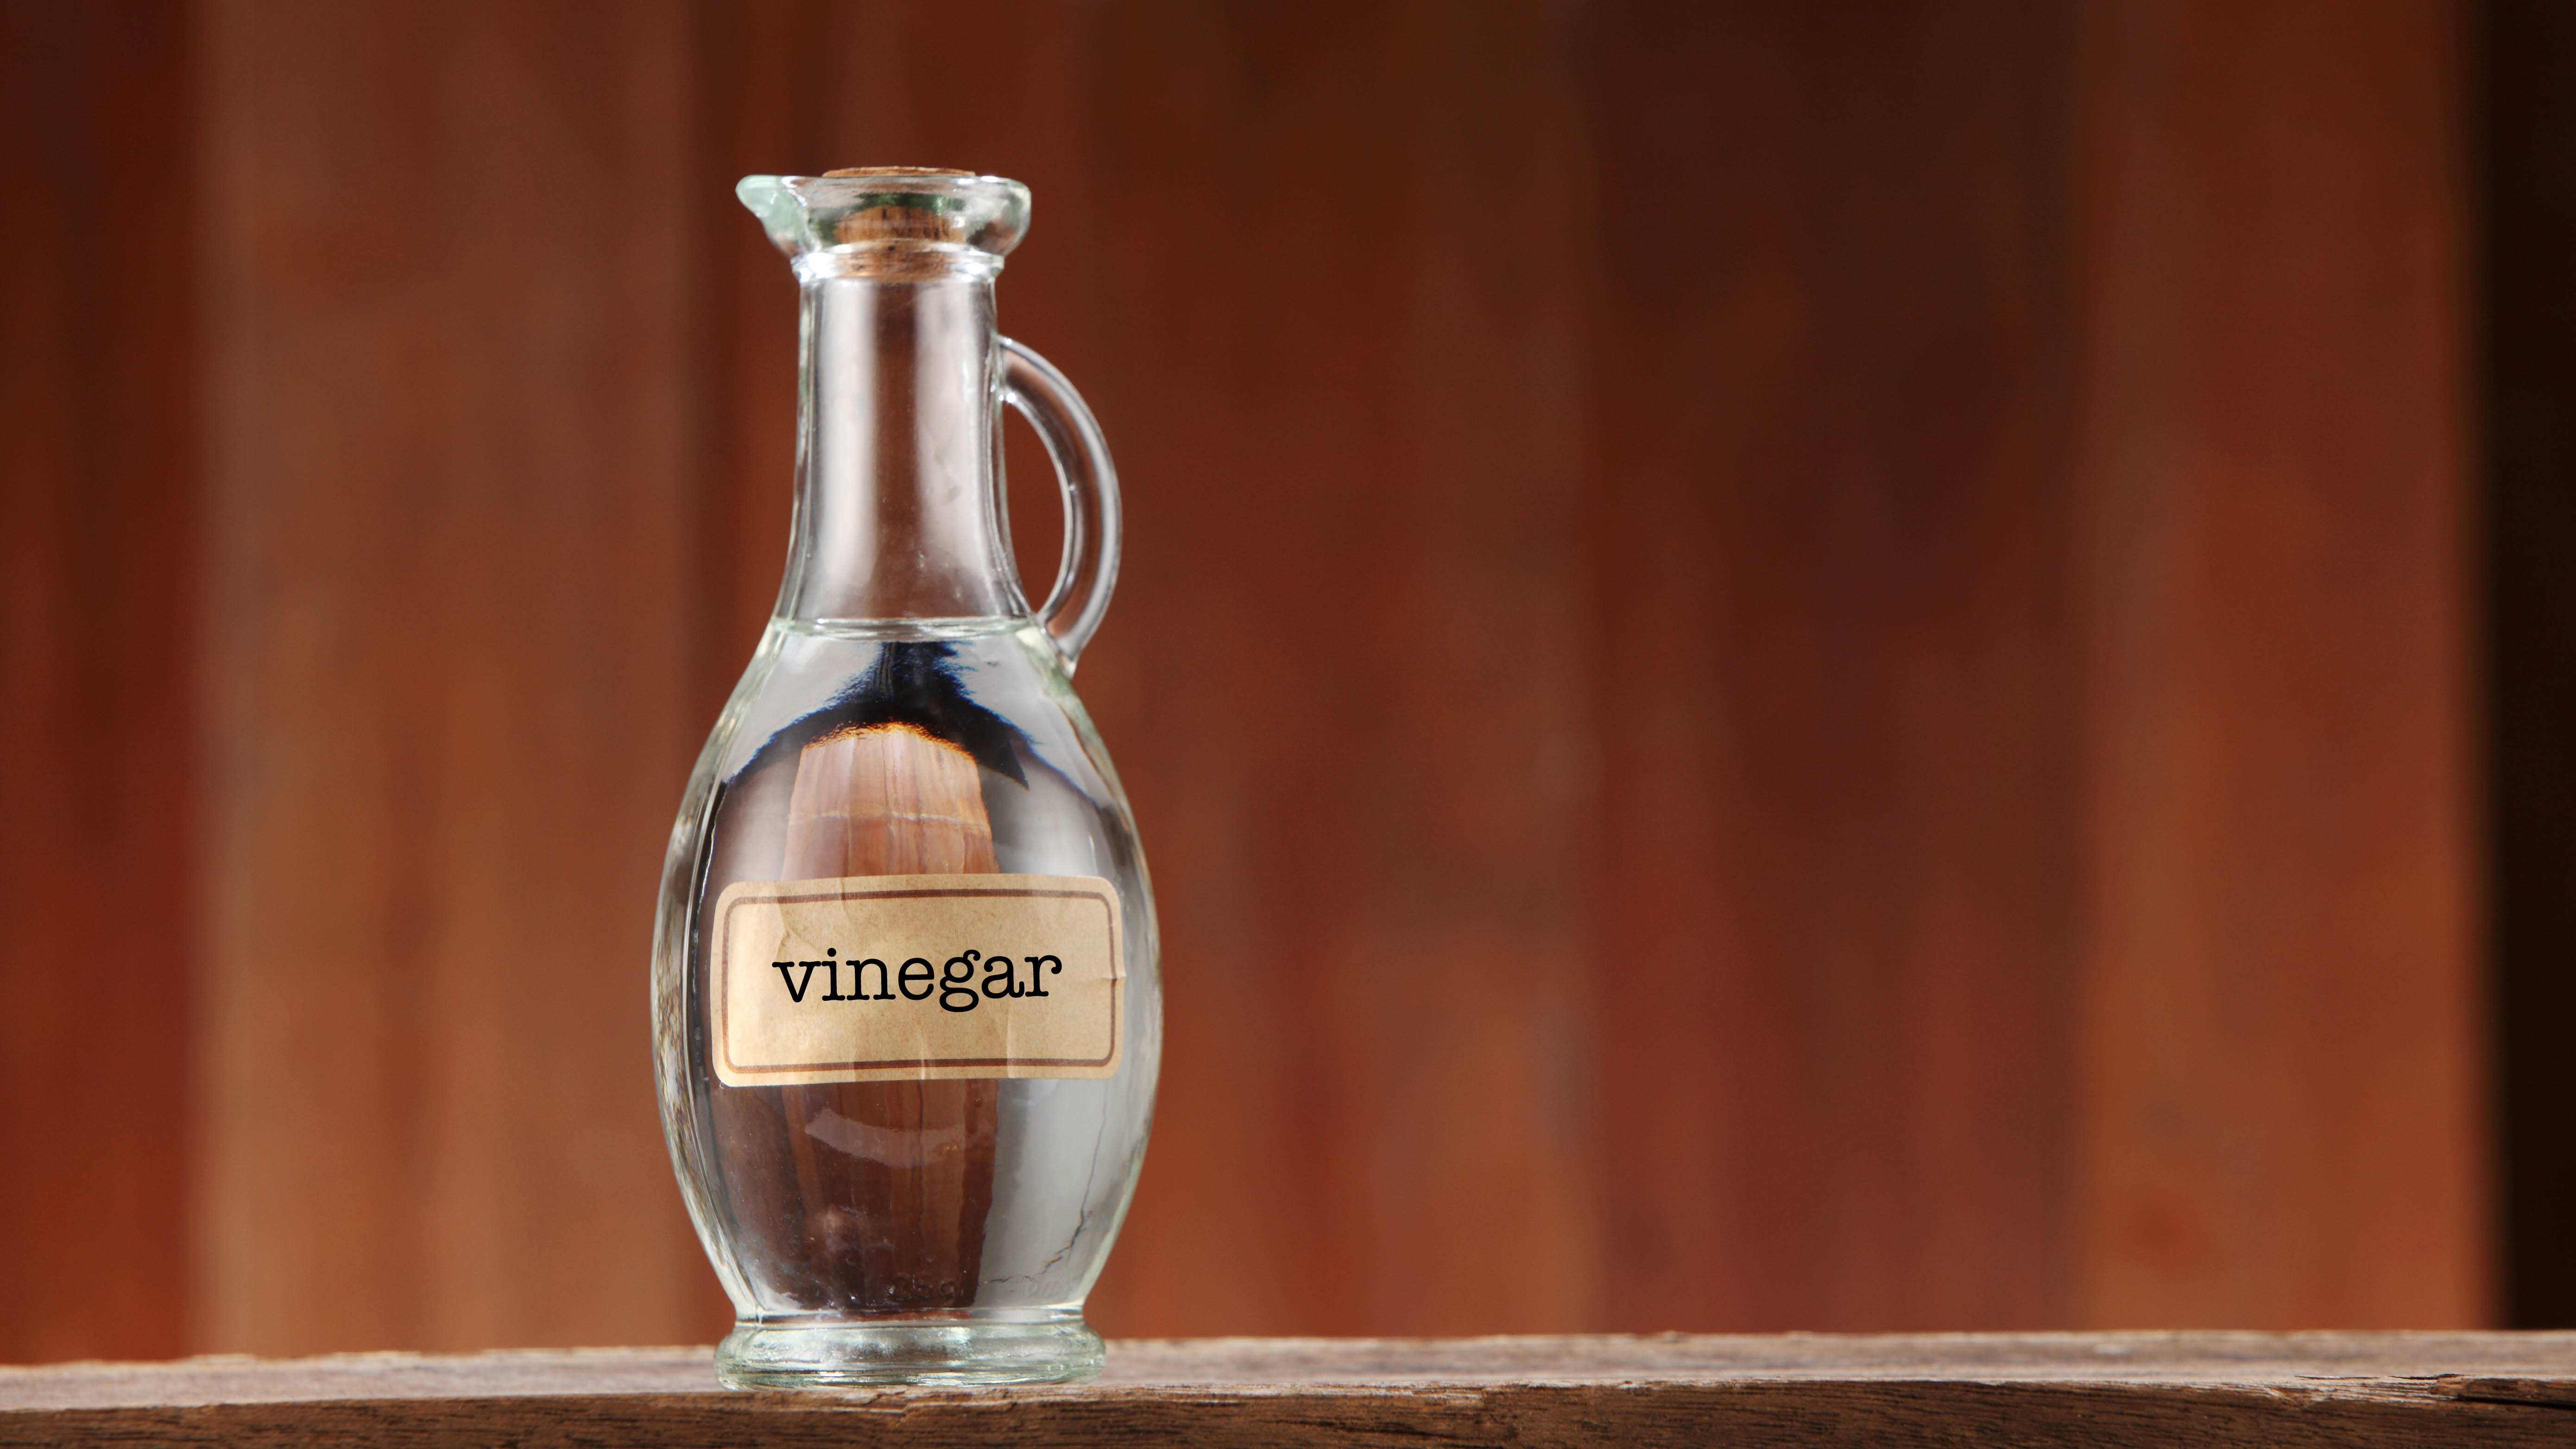 A glass pitcher filled with white vinegar